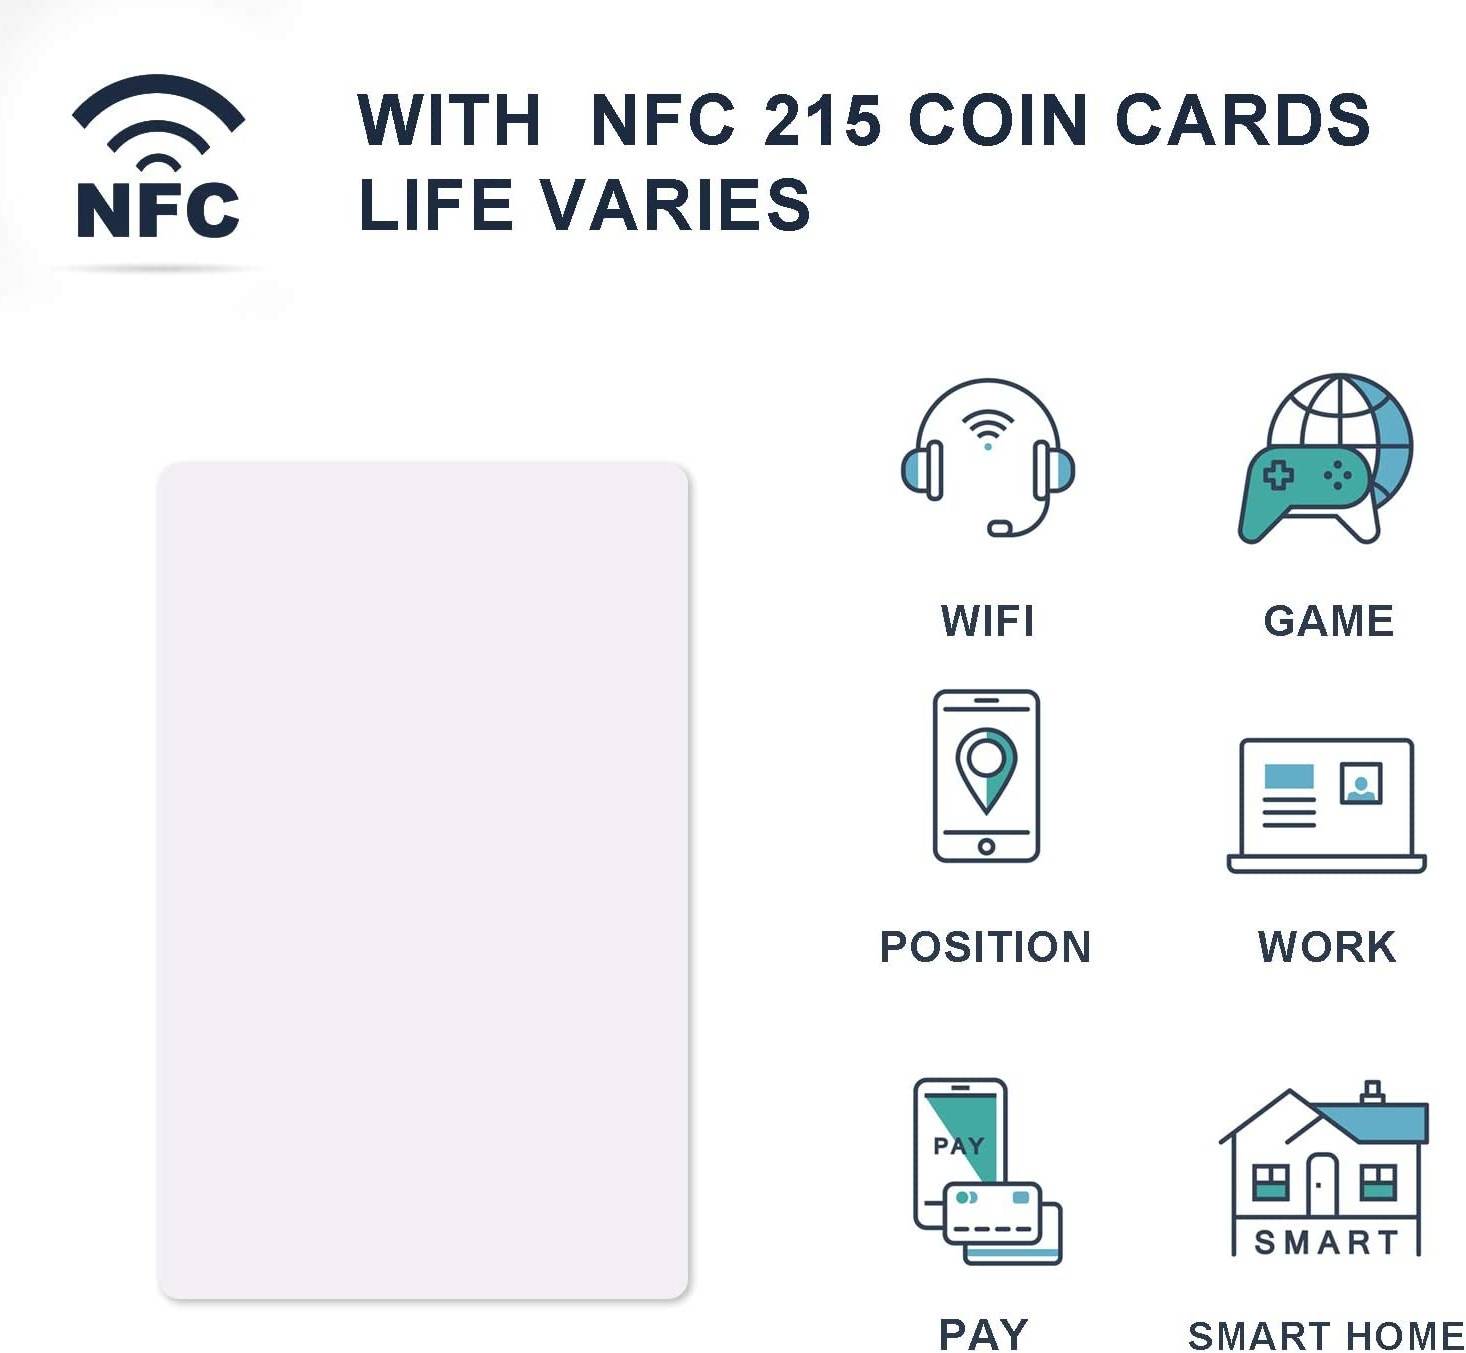 20pcs NFC Cards NFC Tags NFC Business Card NFC 215 Cards NFC Ntag215 Cards Blank NFC Cards 504 Bytes Programmable NFC Tags iPhone Compatible with NFC Enabled Mobile Phones &#038; Devices